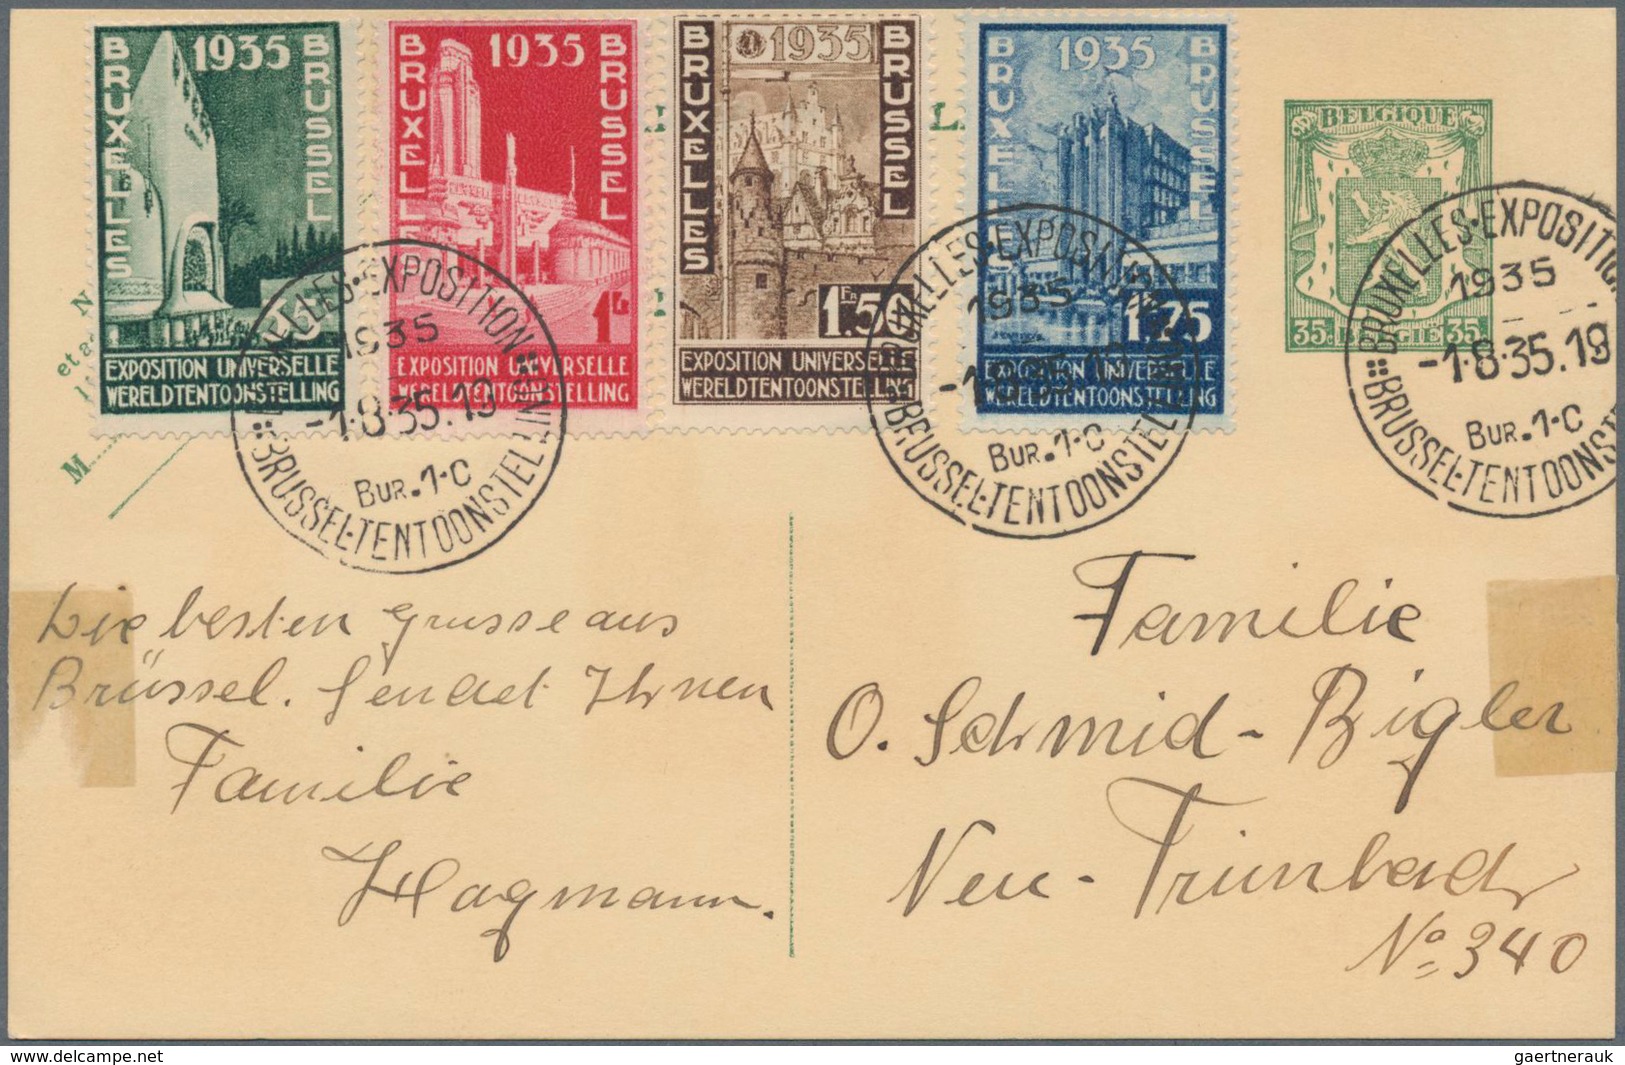 Belgien: 1905/90 (ca.), approx. 480 pieces of postal stationeries and covers etc., including two inv